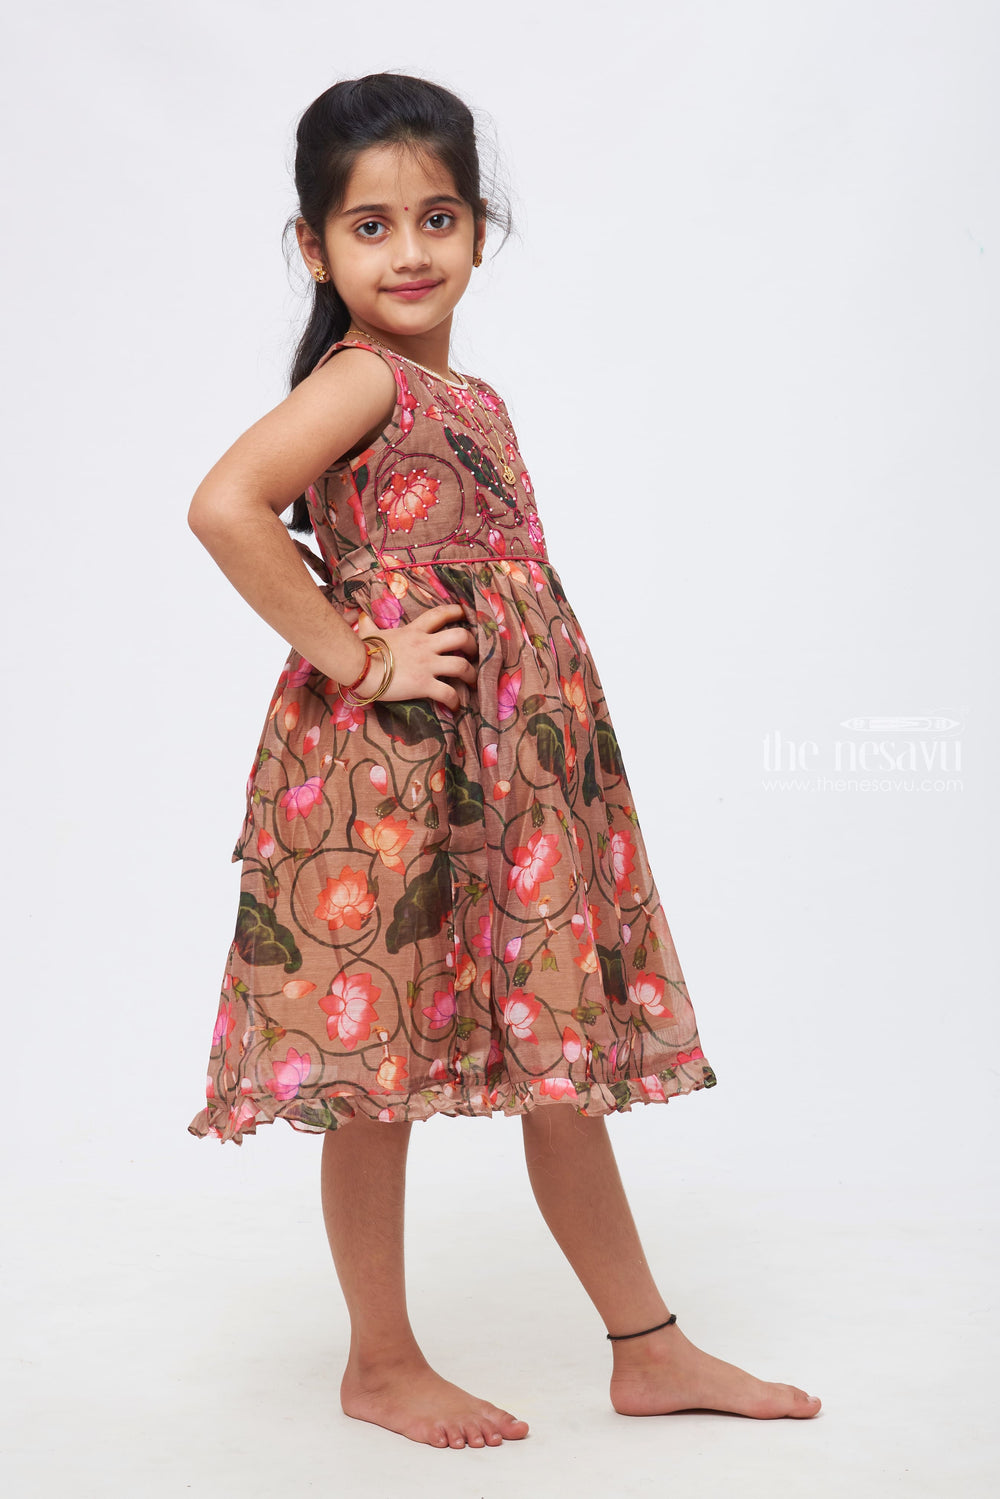 The Nesavu Girls Cotton Frock Enchanted Brown Blossom Tulle Dress - Ethereal Floral Kids Cotton Frock Nesavu Everyday Elegance for Her | Girls Daily Wear Cotton Frocks | The Nesavu